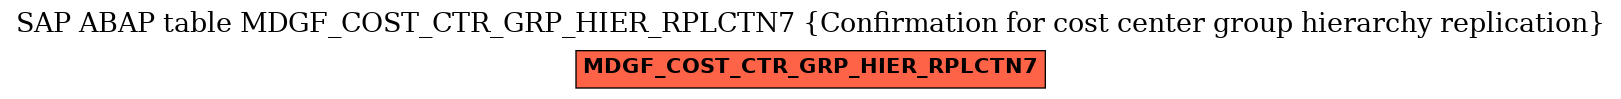 E-R Diagram for table MDGF_COST_CTR_GRP_HIER_RPLCTN7 (Confirmation for cost center group hierarchy replication)